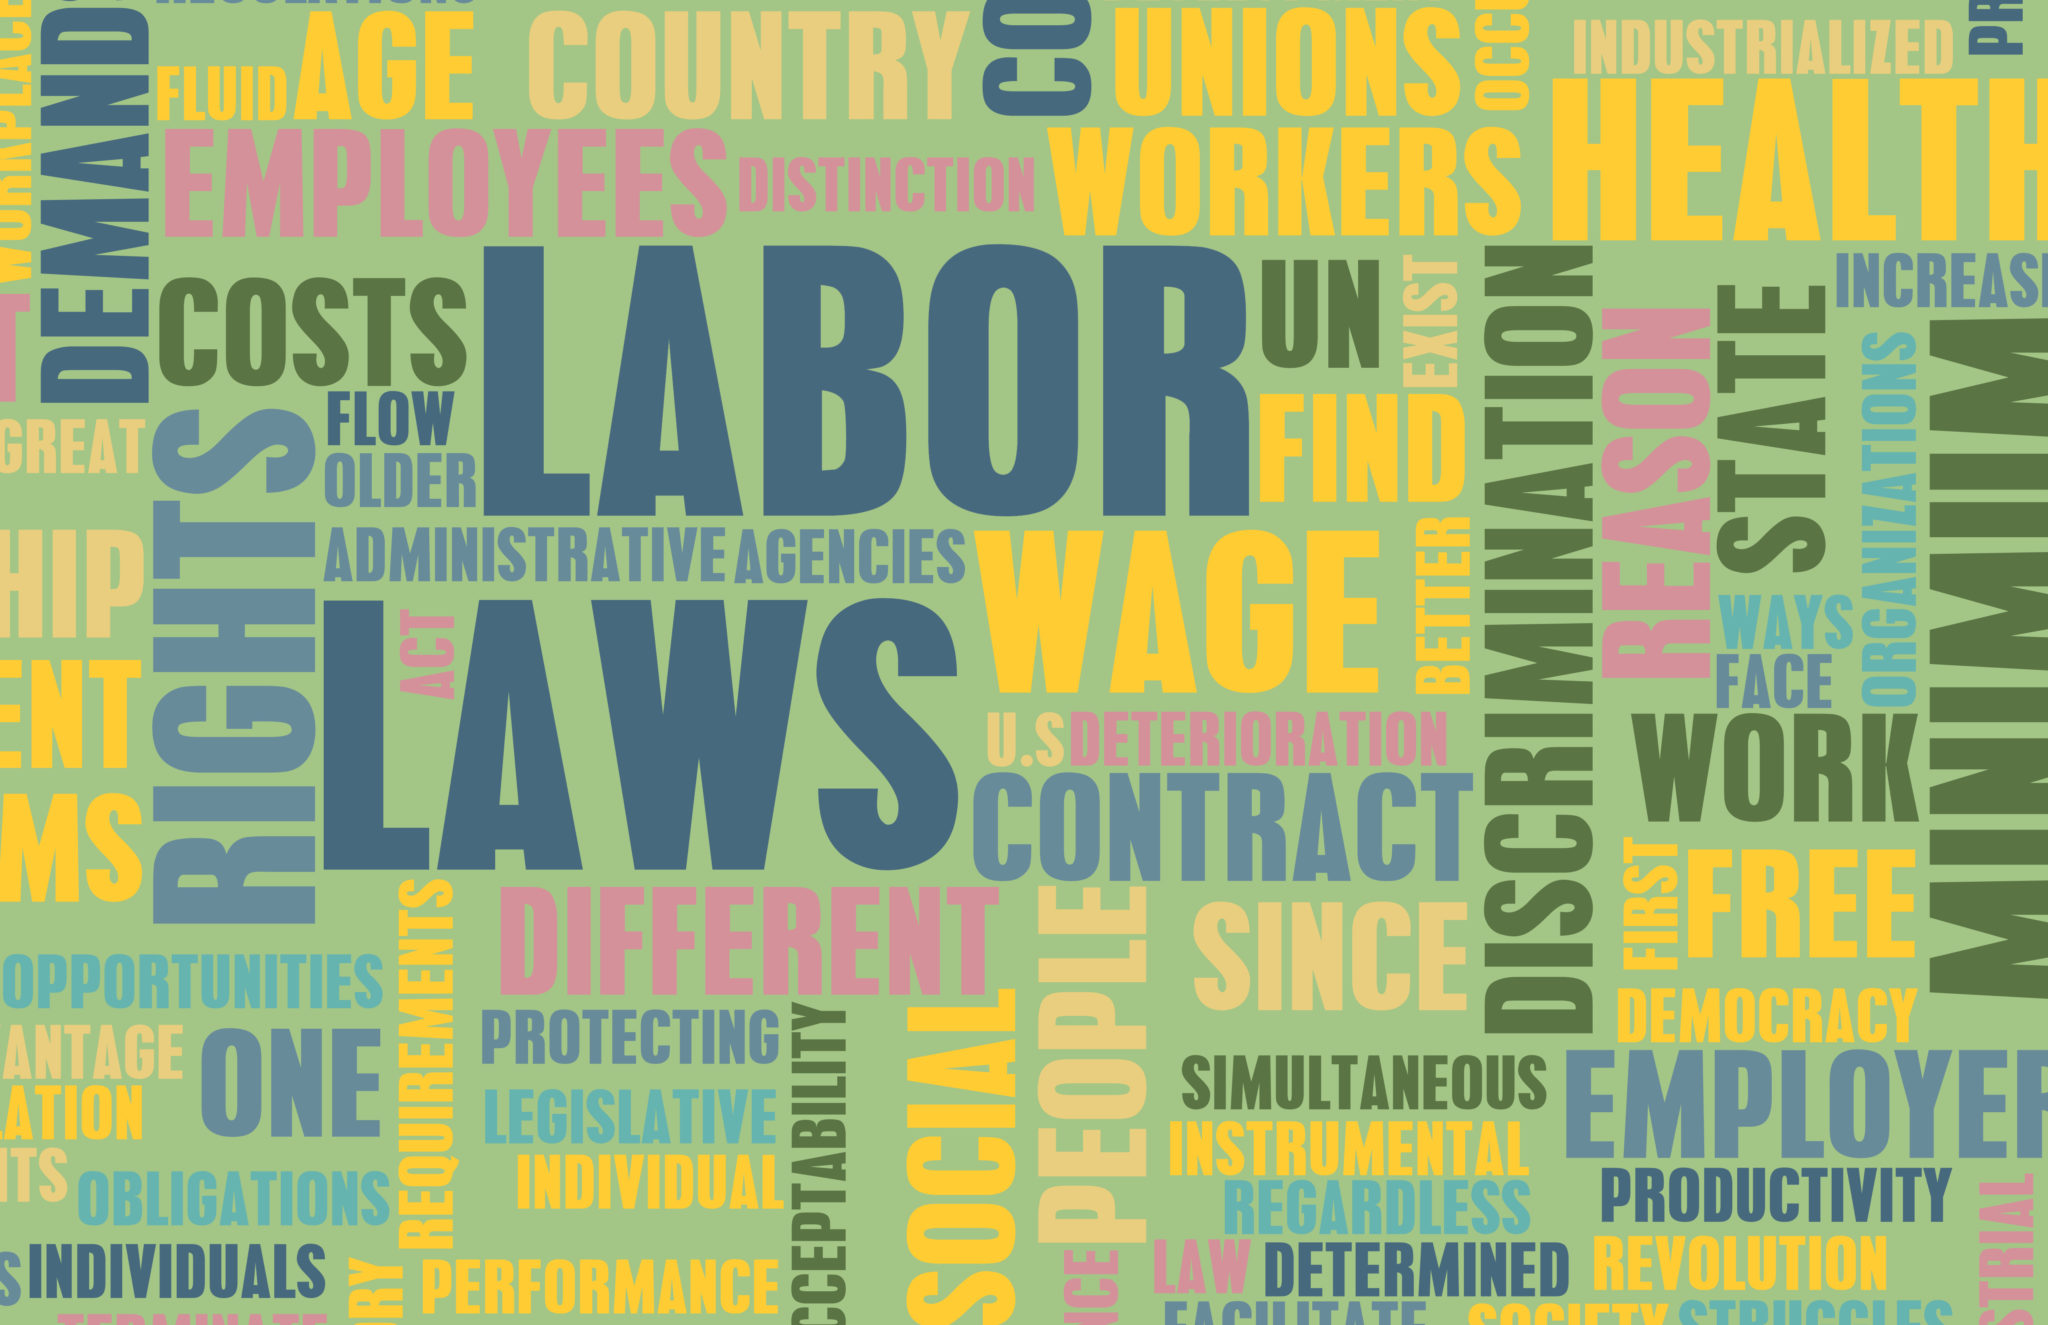 bigstock-Labor-Laws-in-the-Workplace-as-50495255.jpg